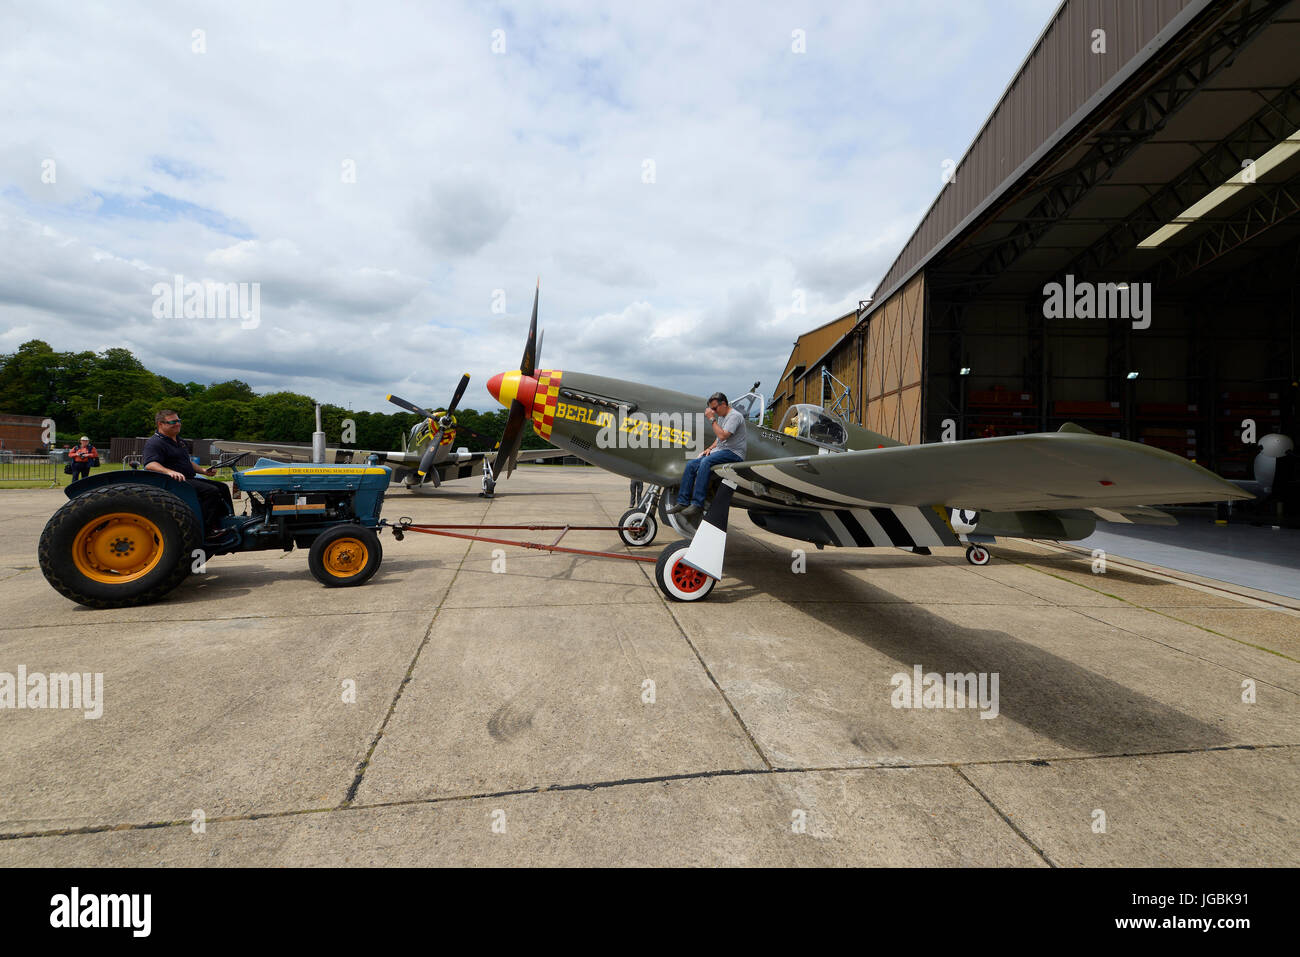 North American P-51B plane named Berlin Express which has flown from the US to appear at airshows in the UK. Duxford, Cambs. Tractor towing Stock Photo